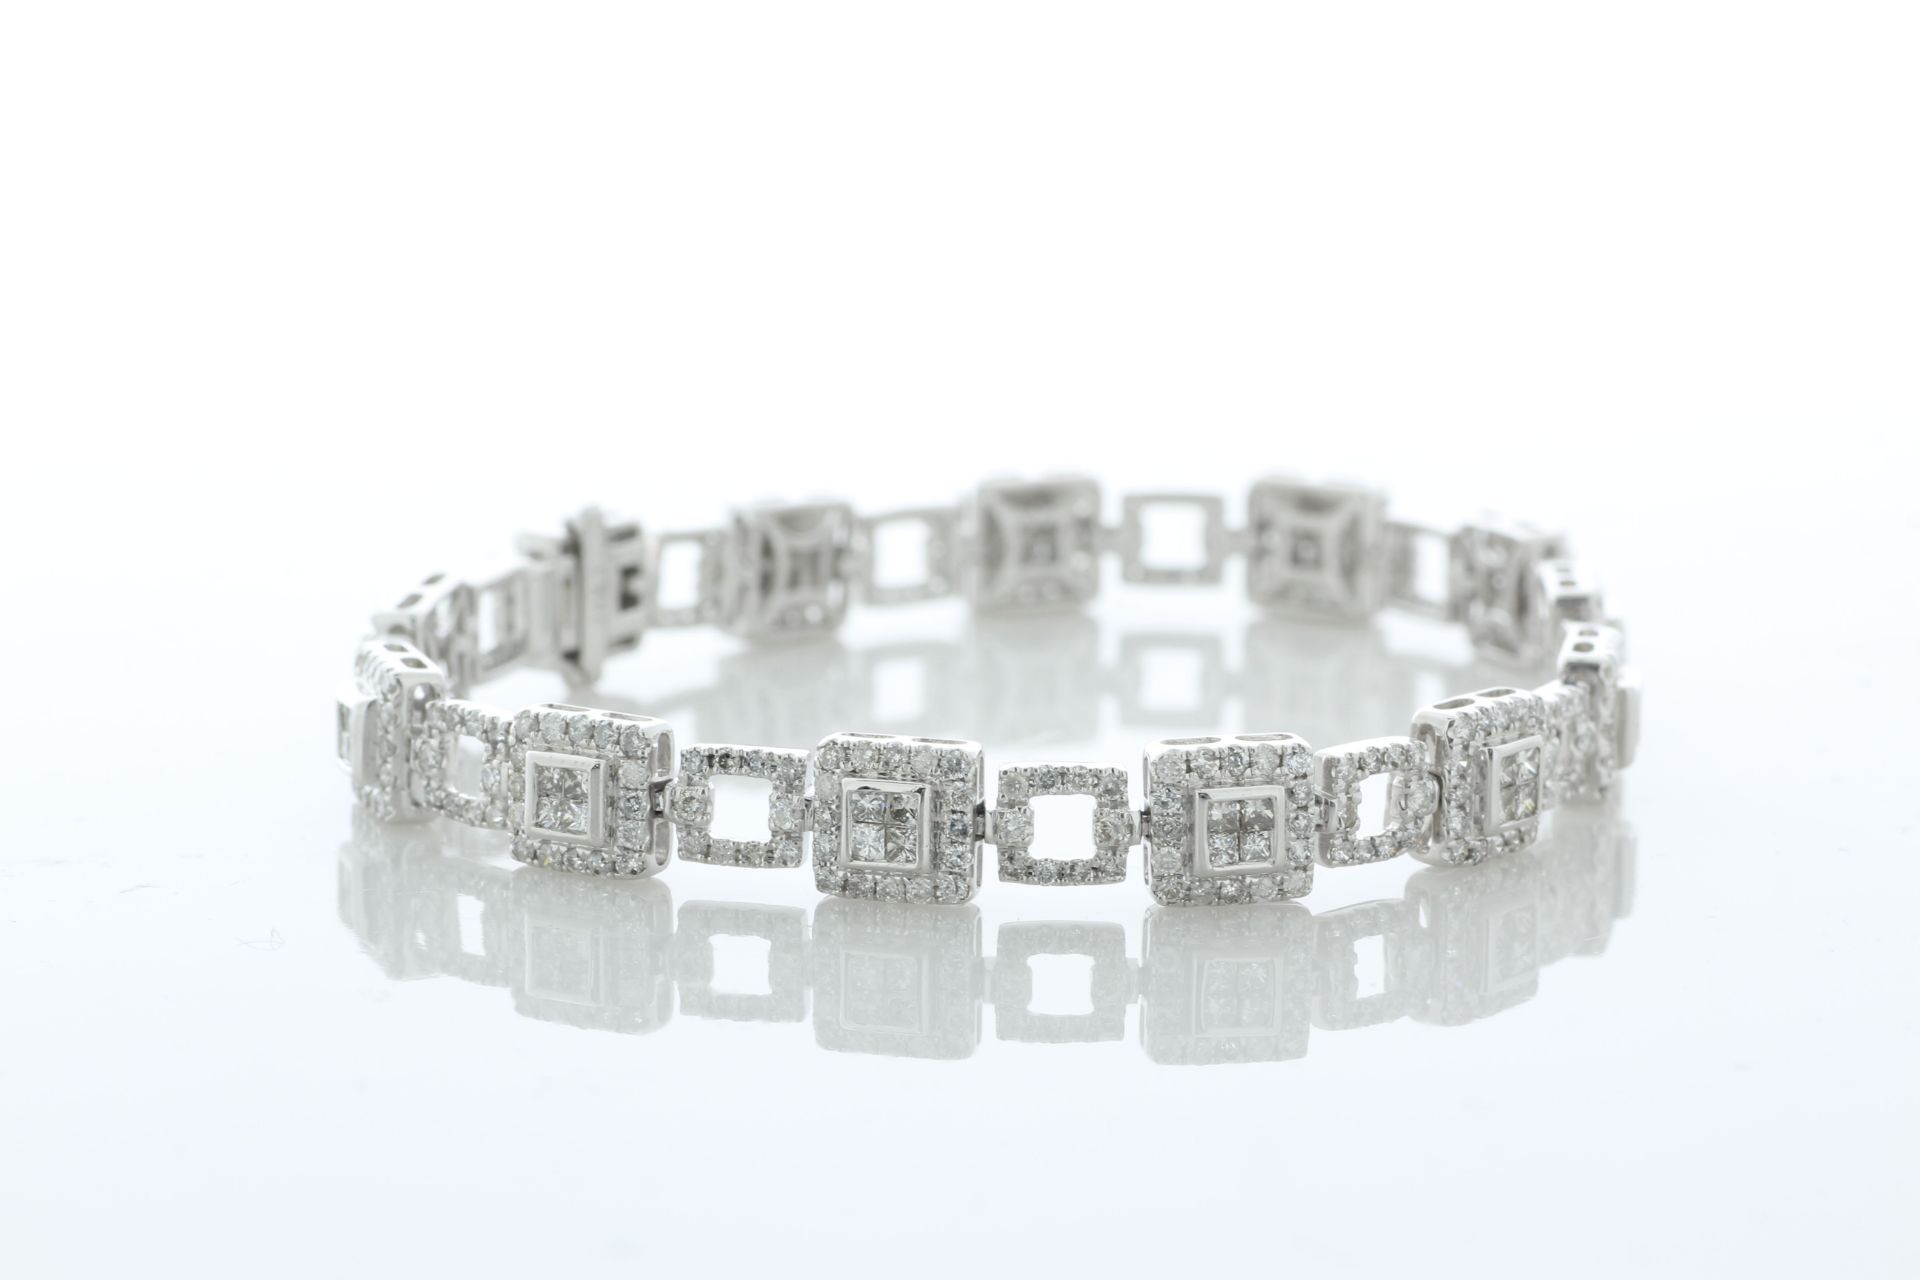 14ct White Gold Full Eternity Diamond Bracelet 3.80 Carats - Valued By IDI £19,850.00 - This